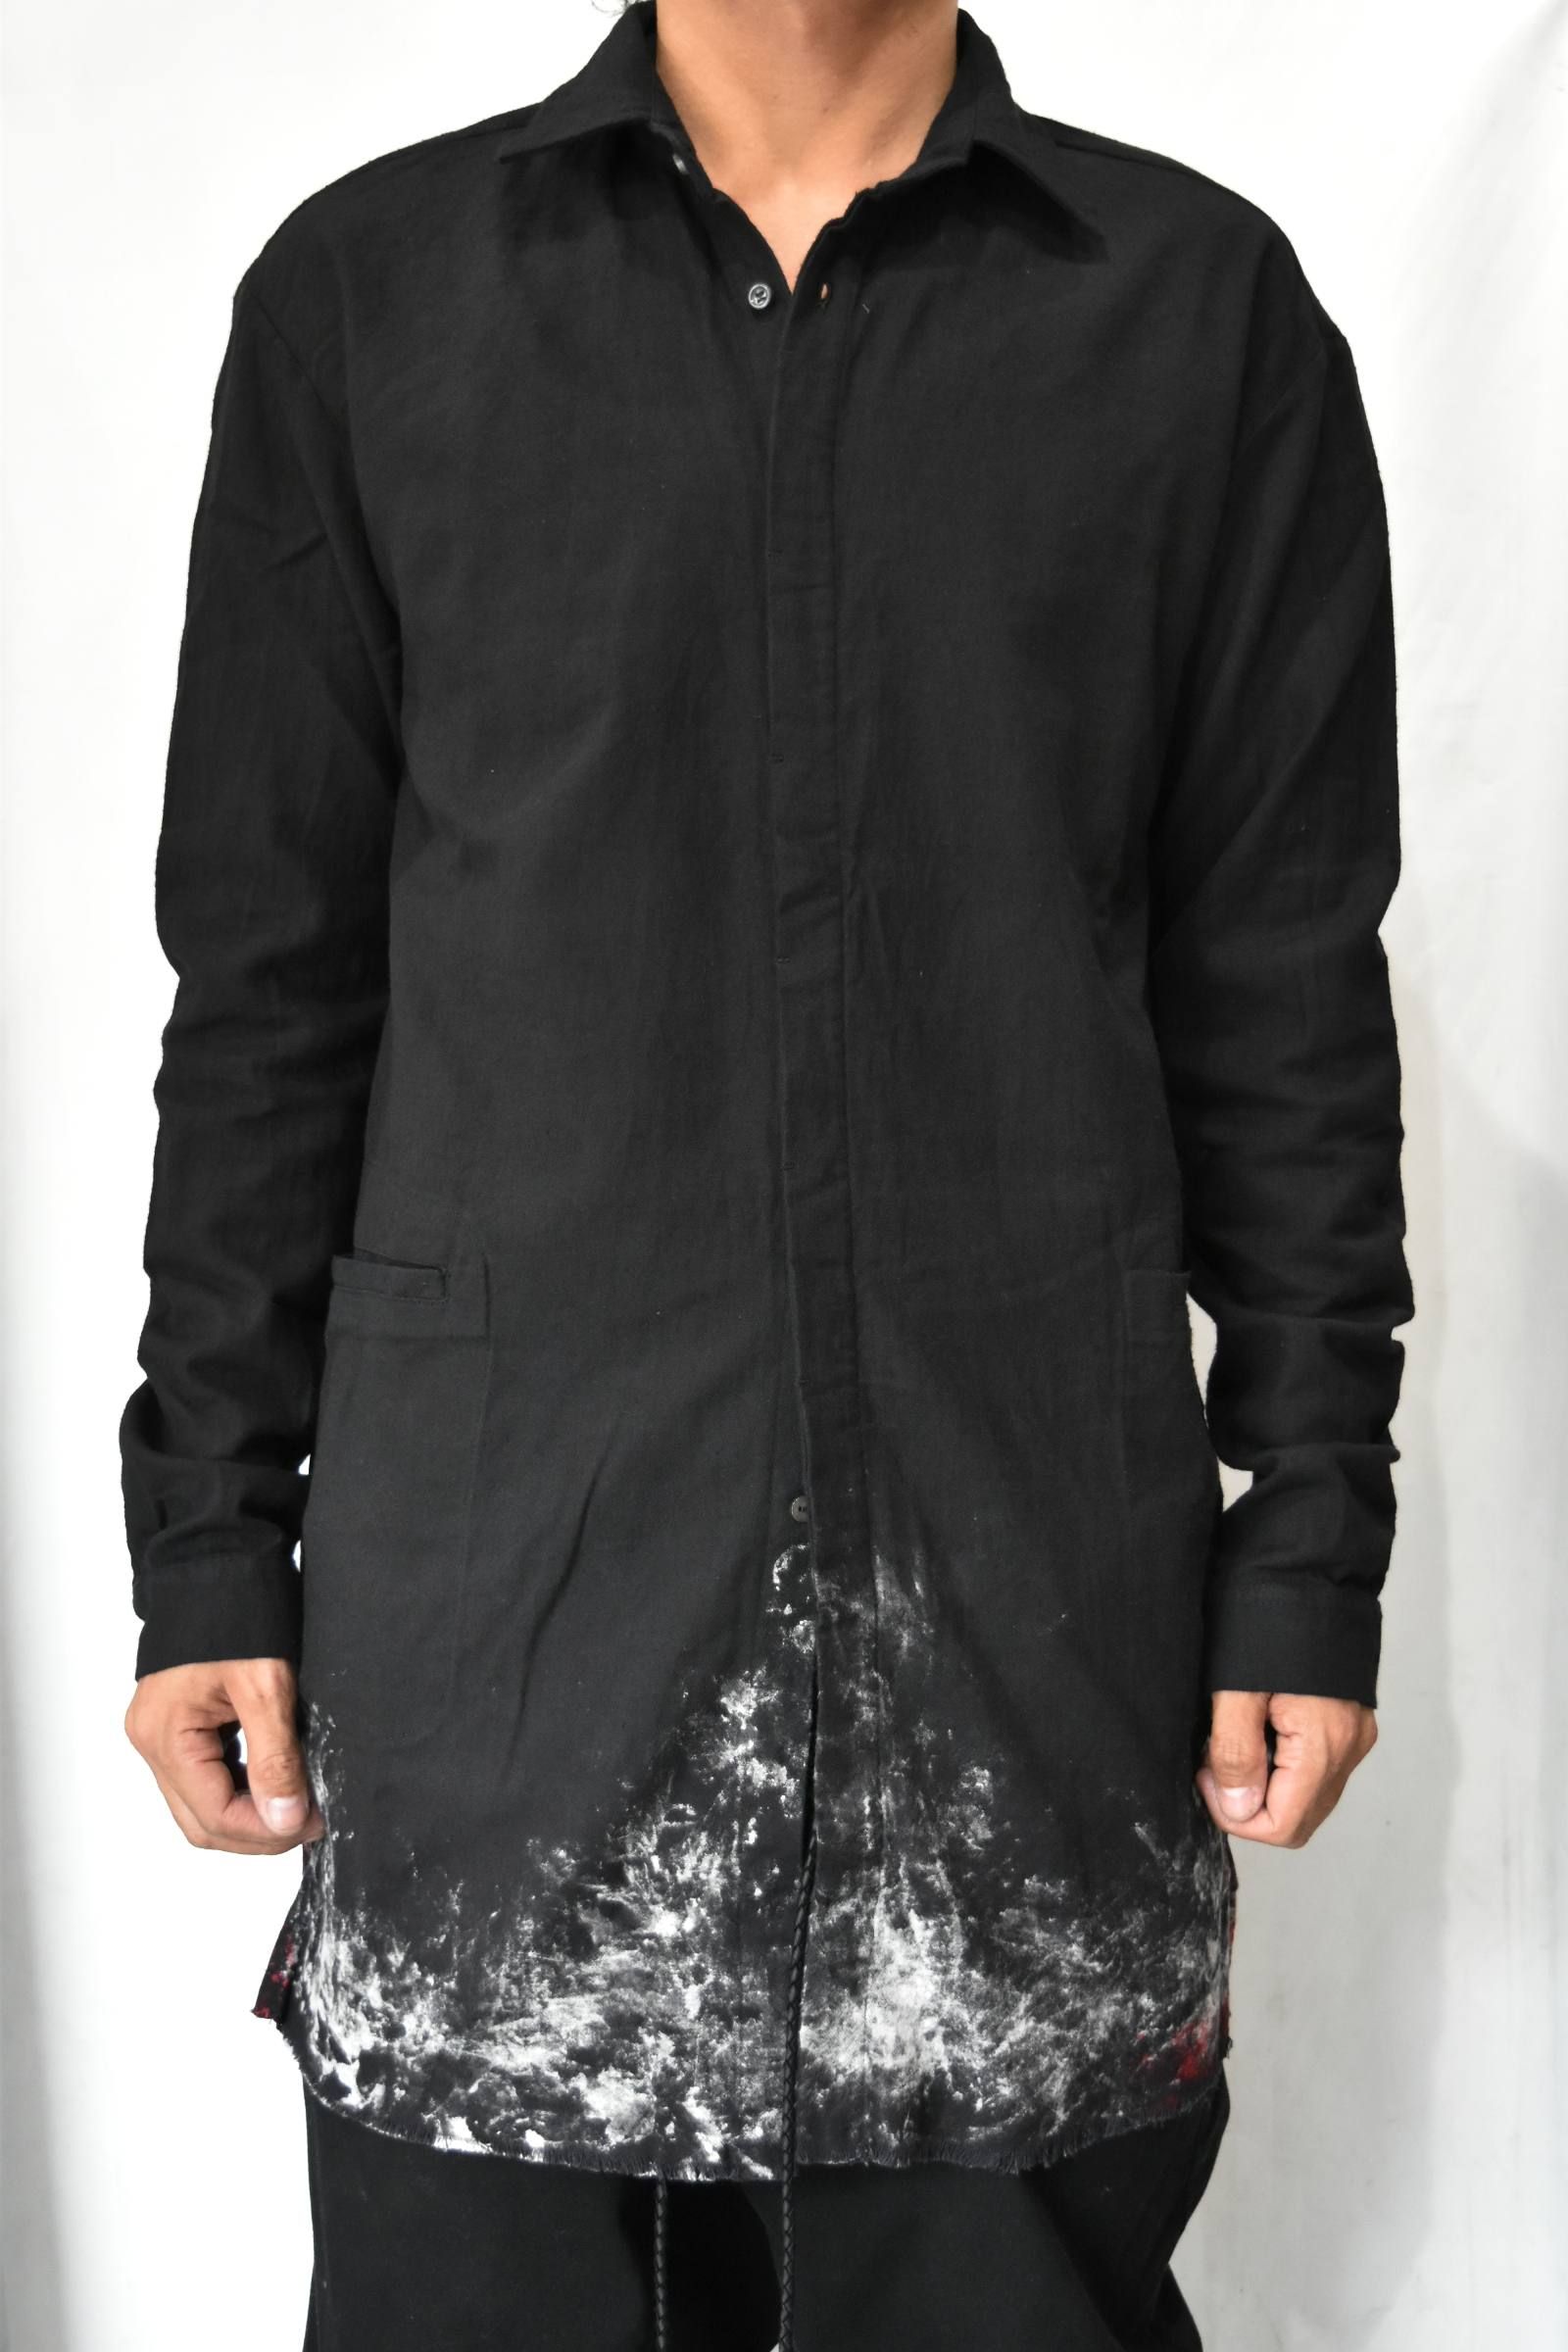 KMRii - Discharged Monolith Shirt (Black) | chord online store